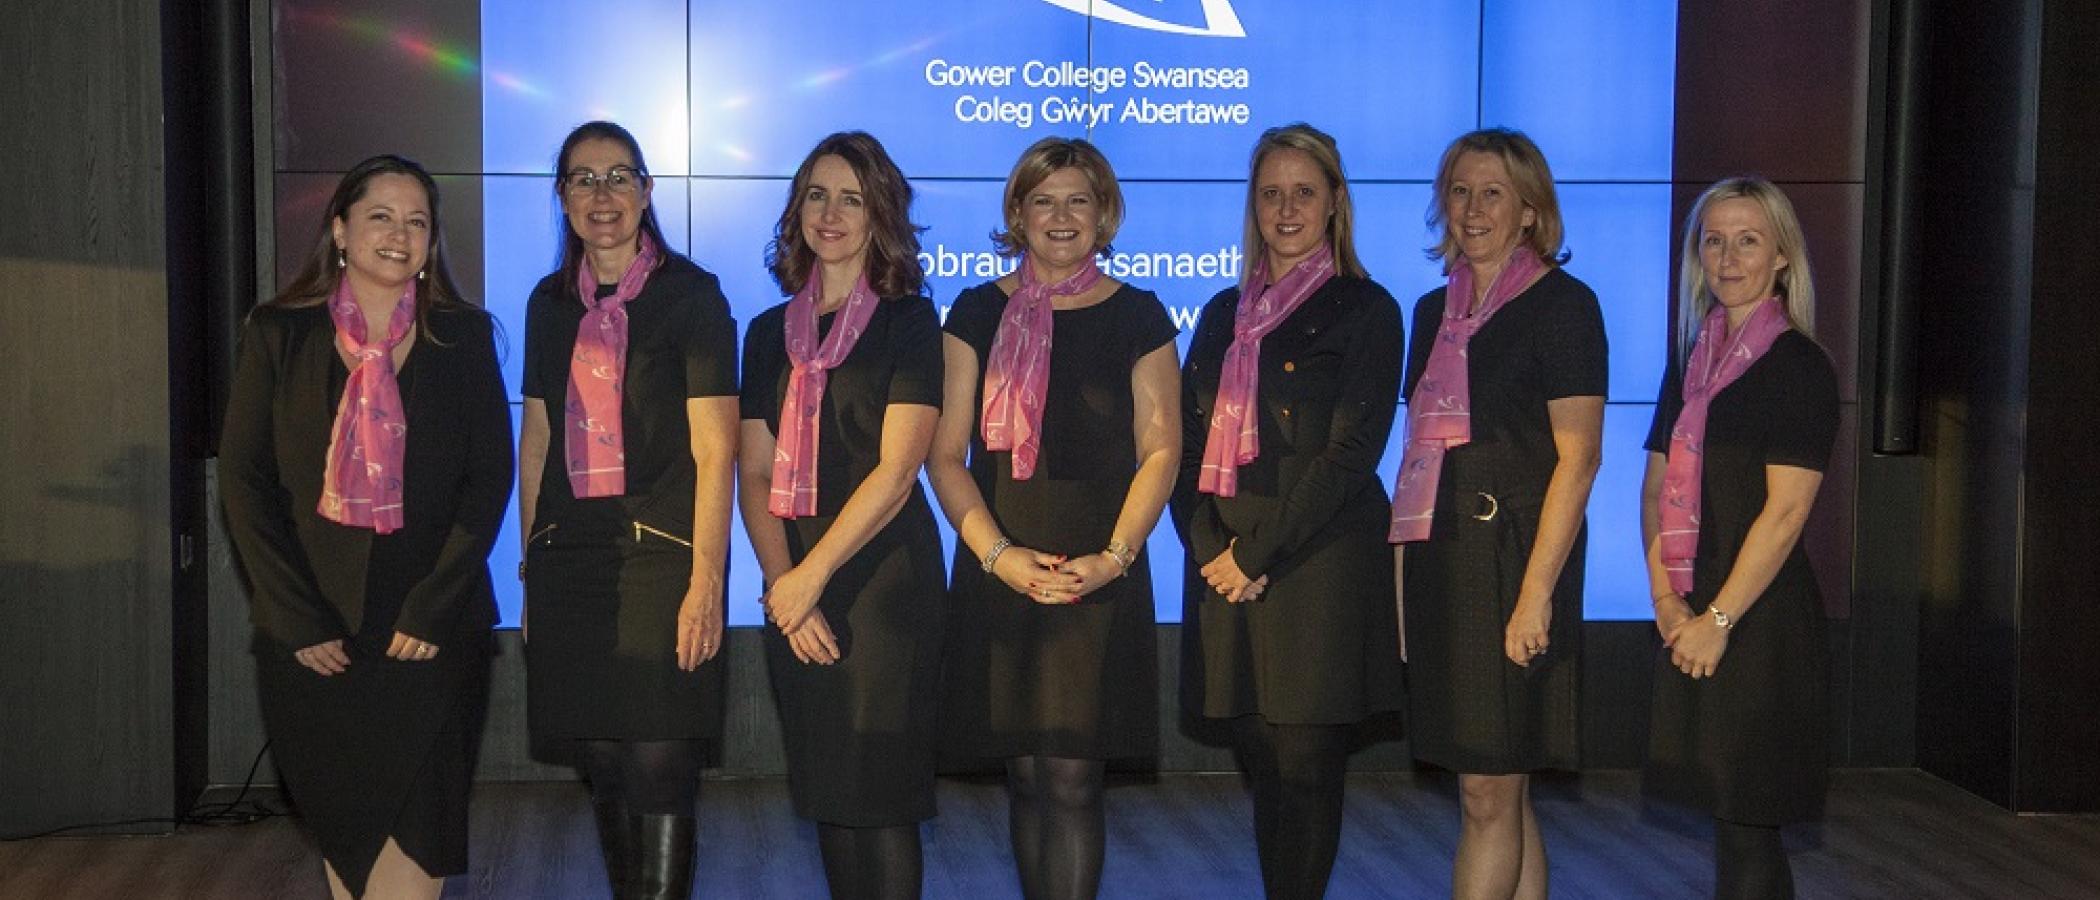 Gower College Swansea has been shortlisted for seven categories in top HR Awards